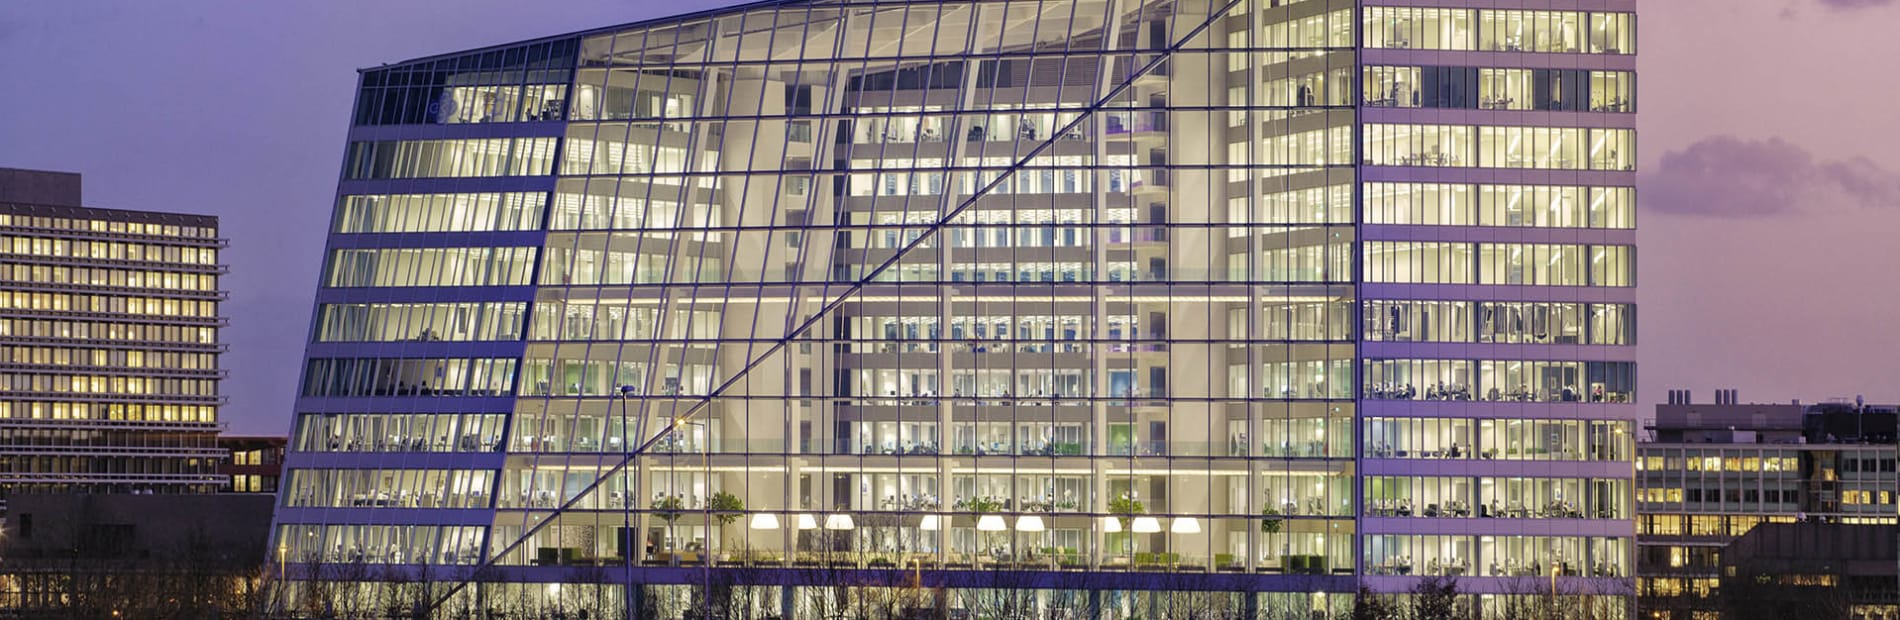 Large glass commercial building in a city